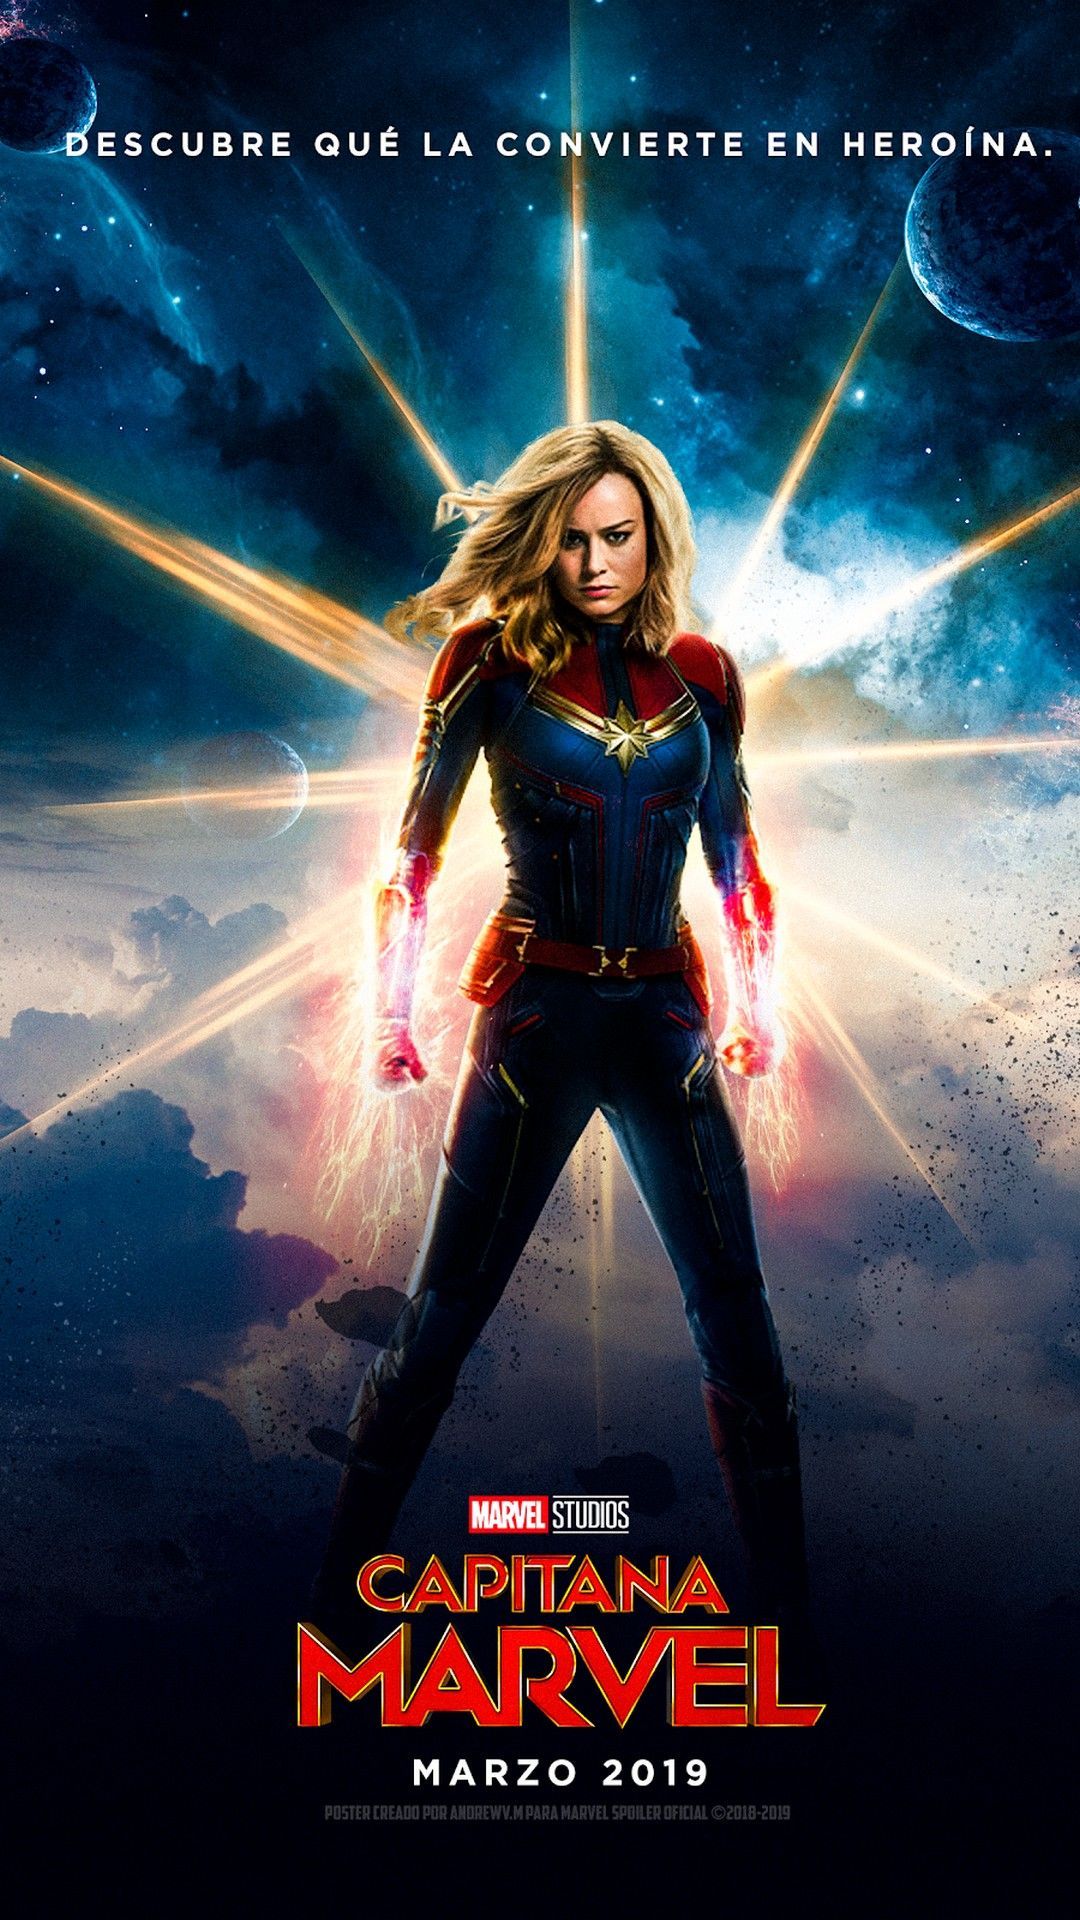 Captain Marvel Android Wallpaper Movie Poster Wallpaper HD. Captain marvel, Captain marvel carol danvers, Marvel movie posters